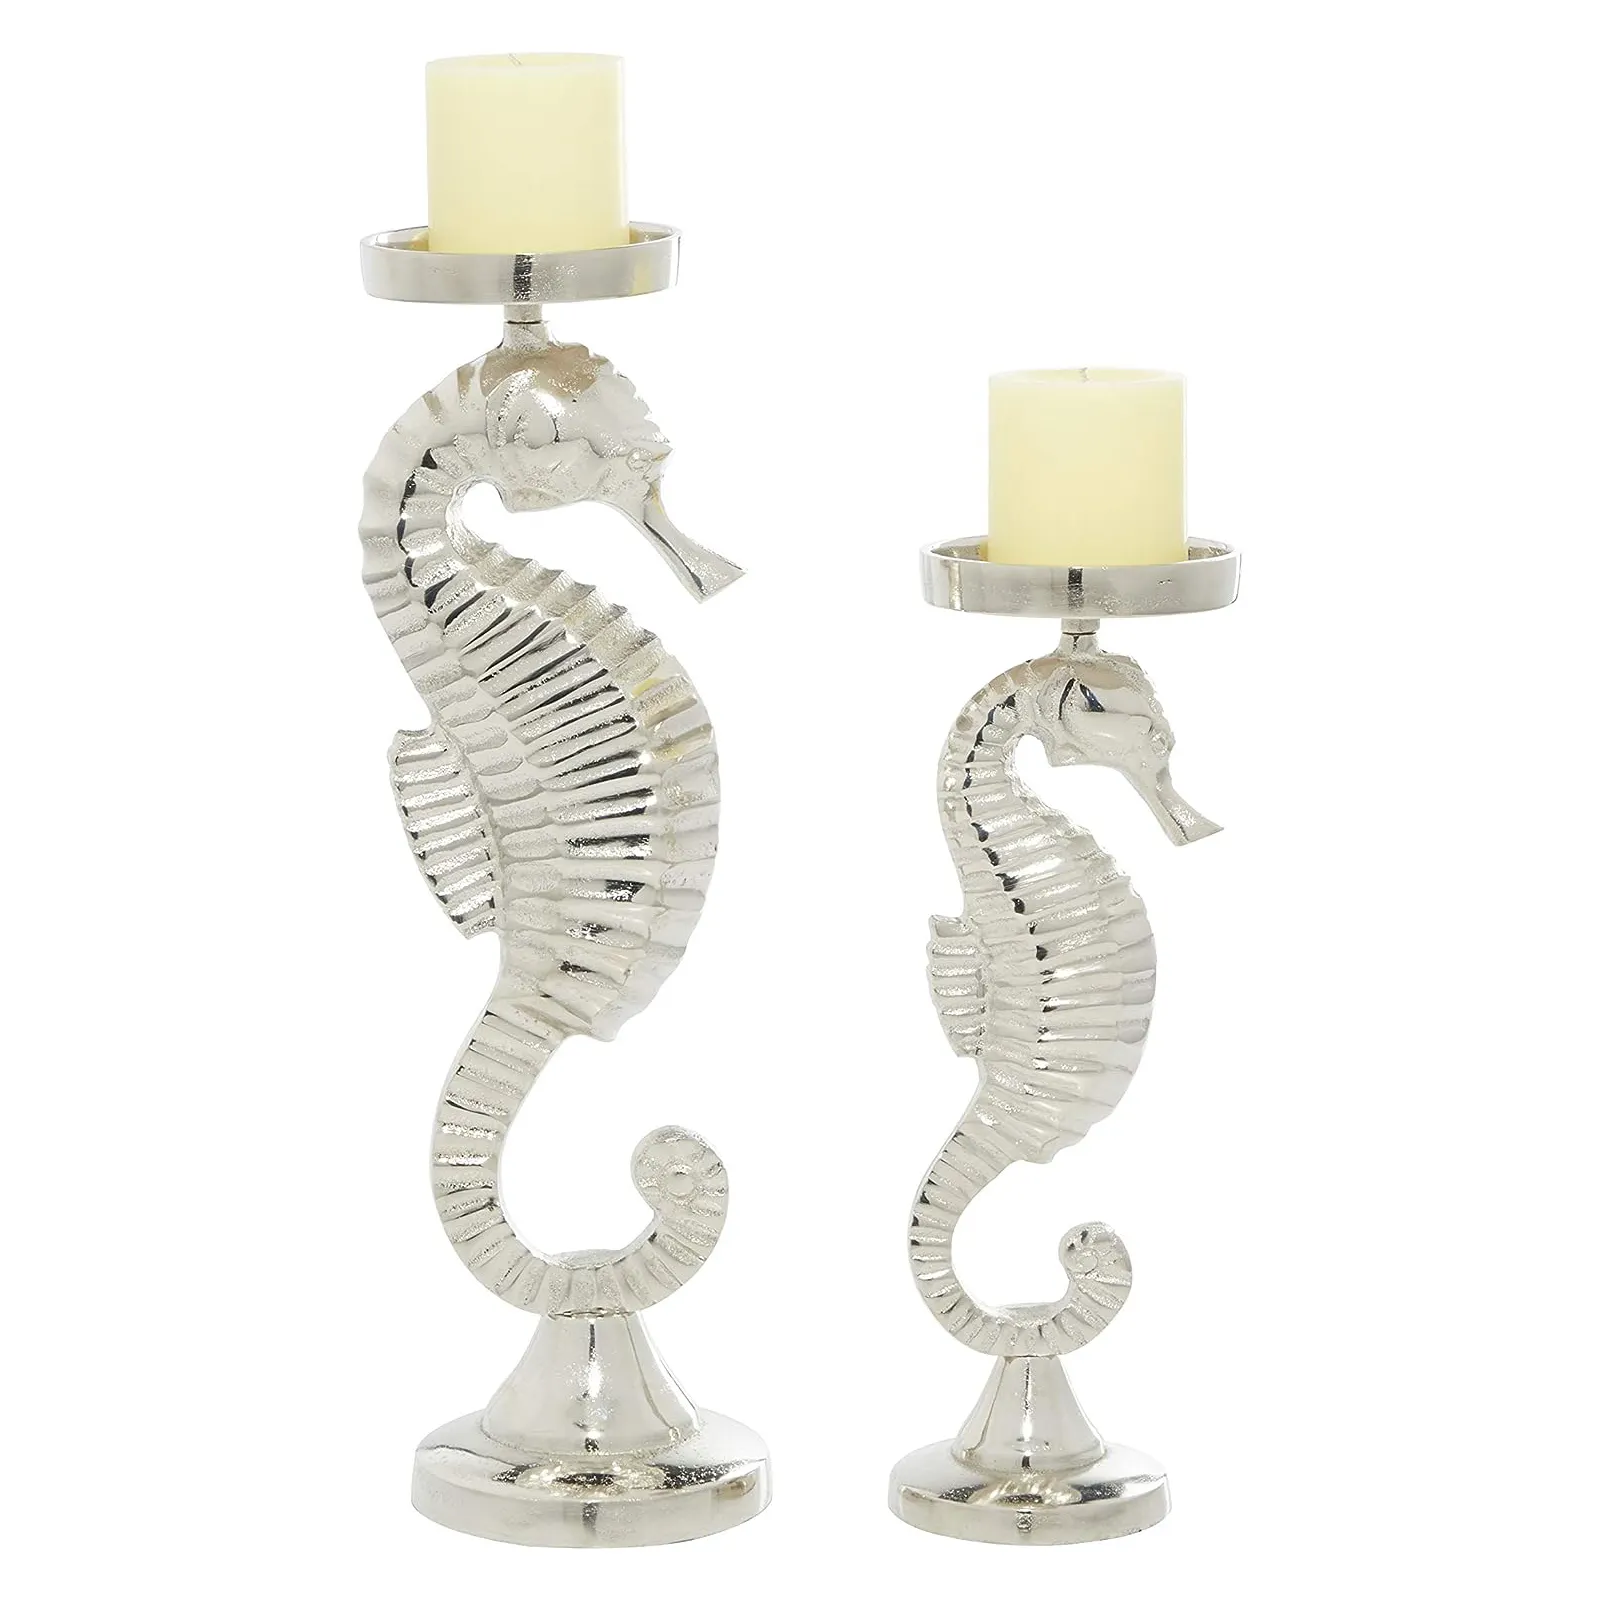 Cast Aluminum Seahorse Candle Stand Set Of 2 Silver Finished Sculpture Statue Candlestick Holder for Home Decorations Gifts Item